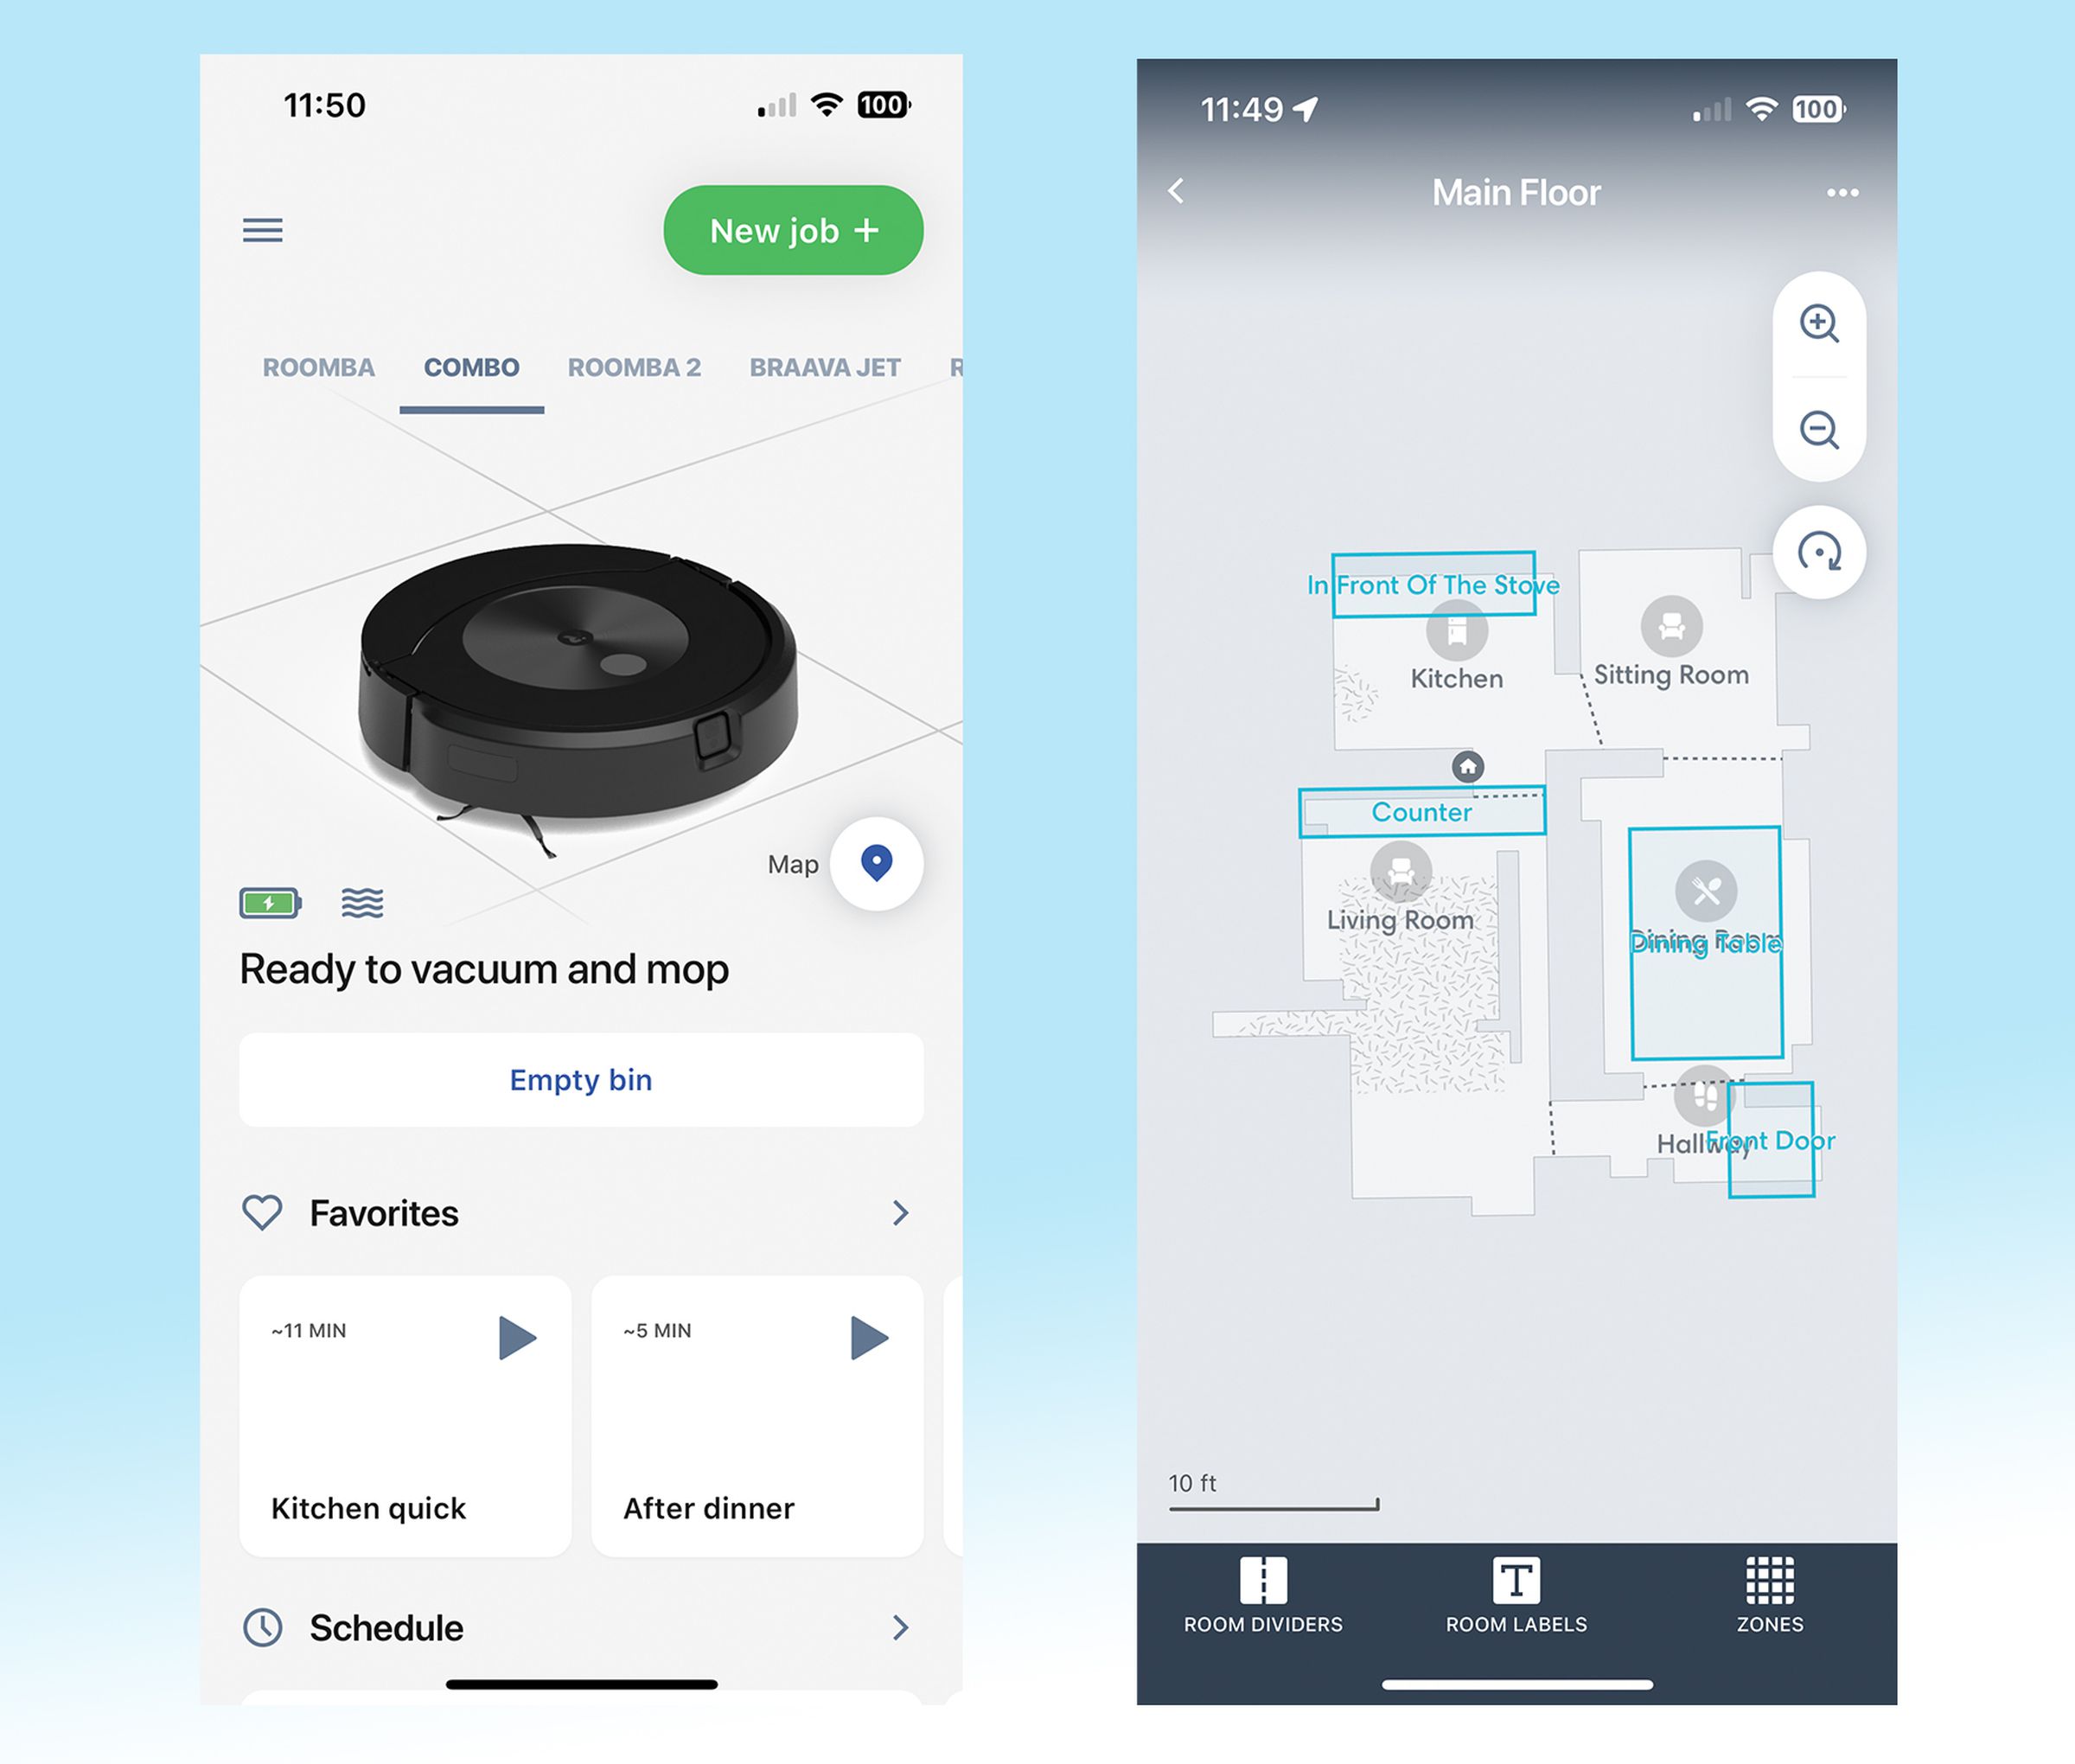 Screenshots from the iRobot app. On the left, a screen showing the vacuum status and some controls, including a favorites section with routines labelled “Kitchen quick” and “After dinner.” On the right, a floor plan labeled “Main Floor” showing several designated clean zones and carpeted areas.